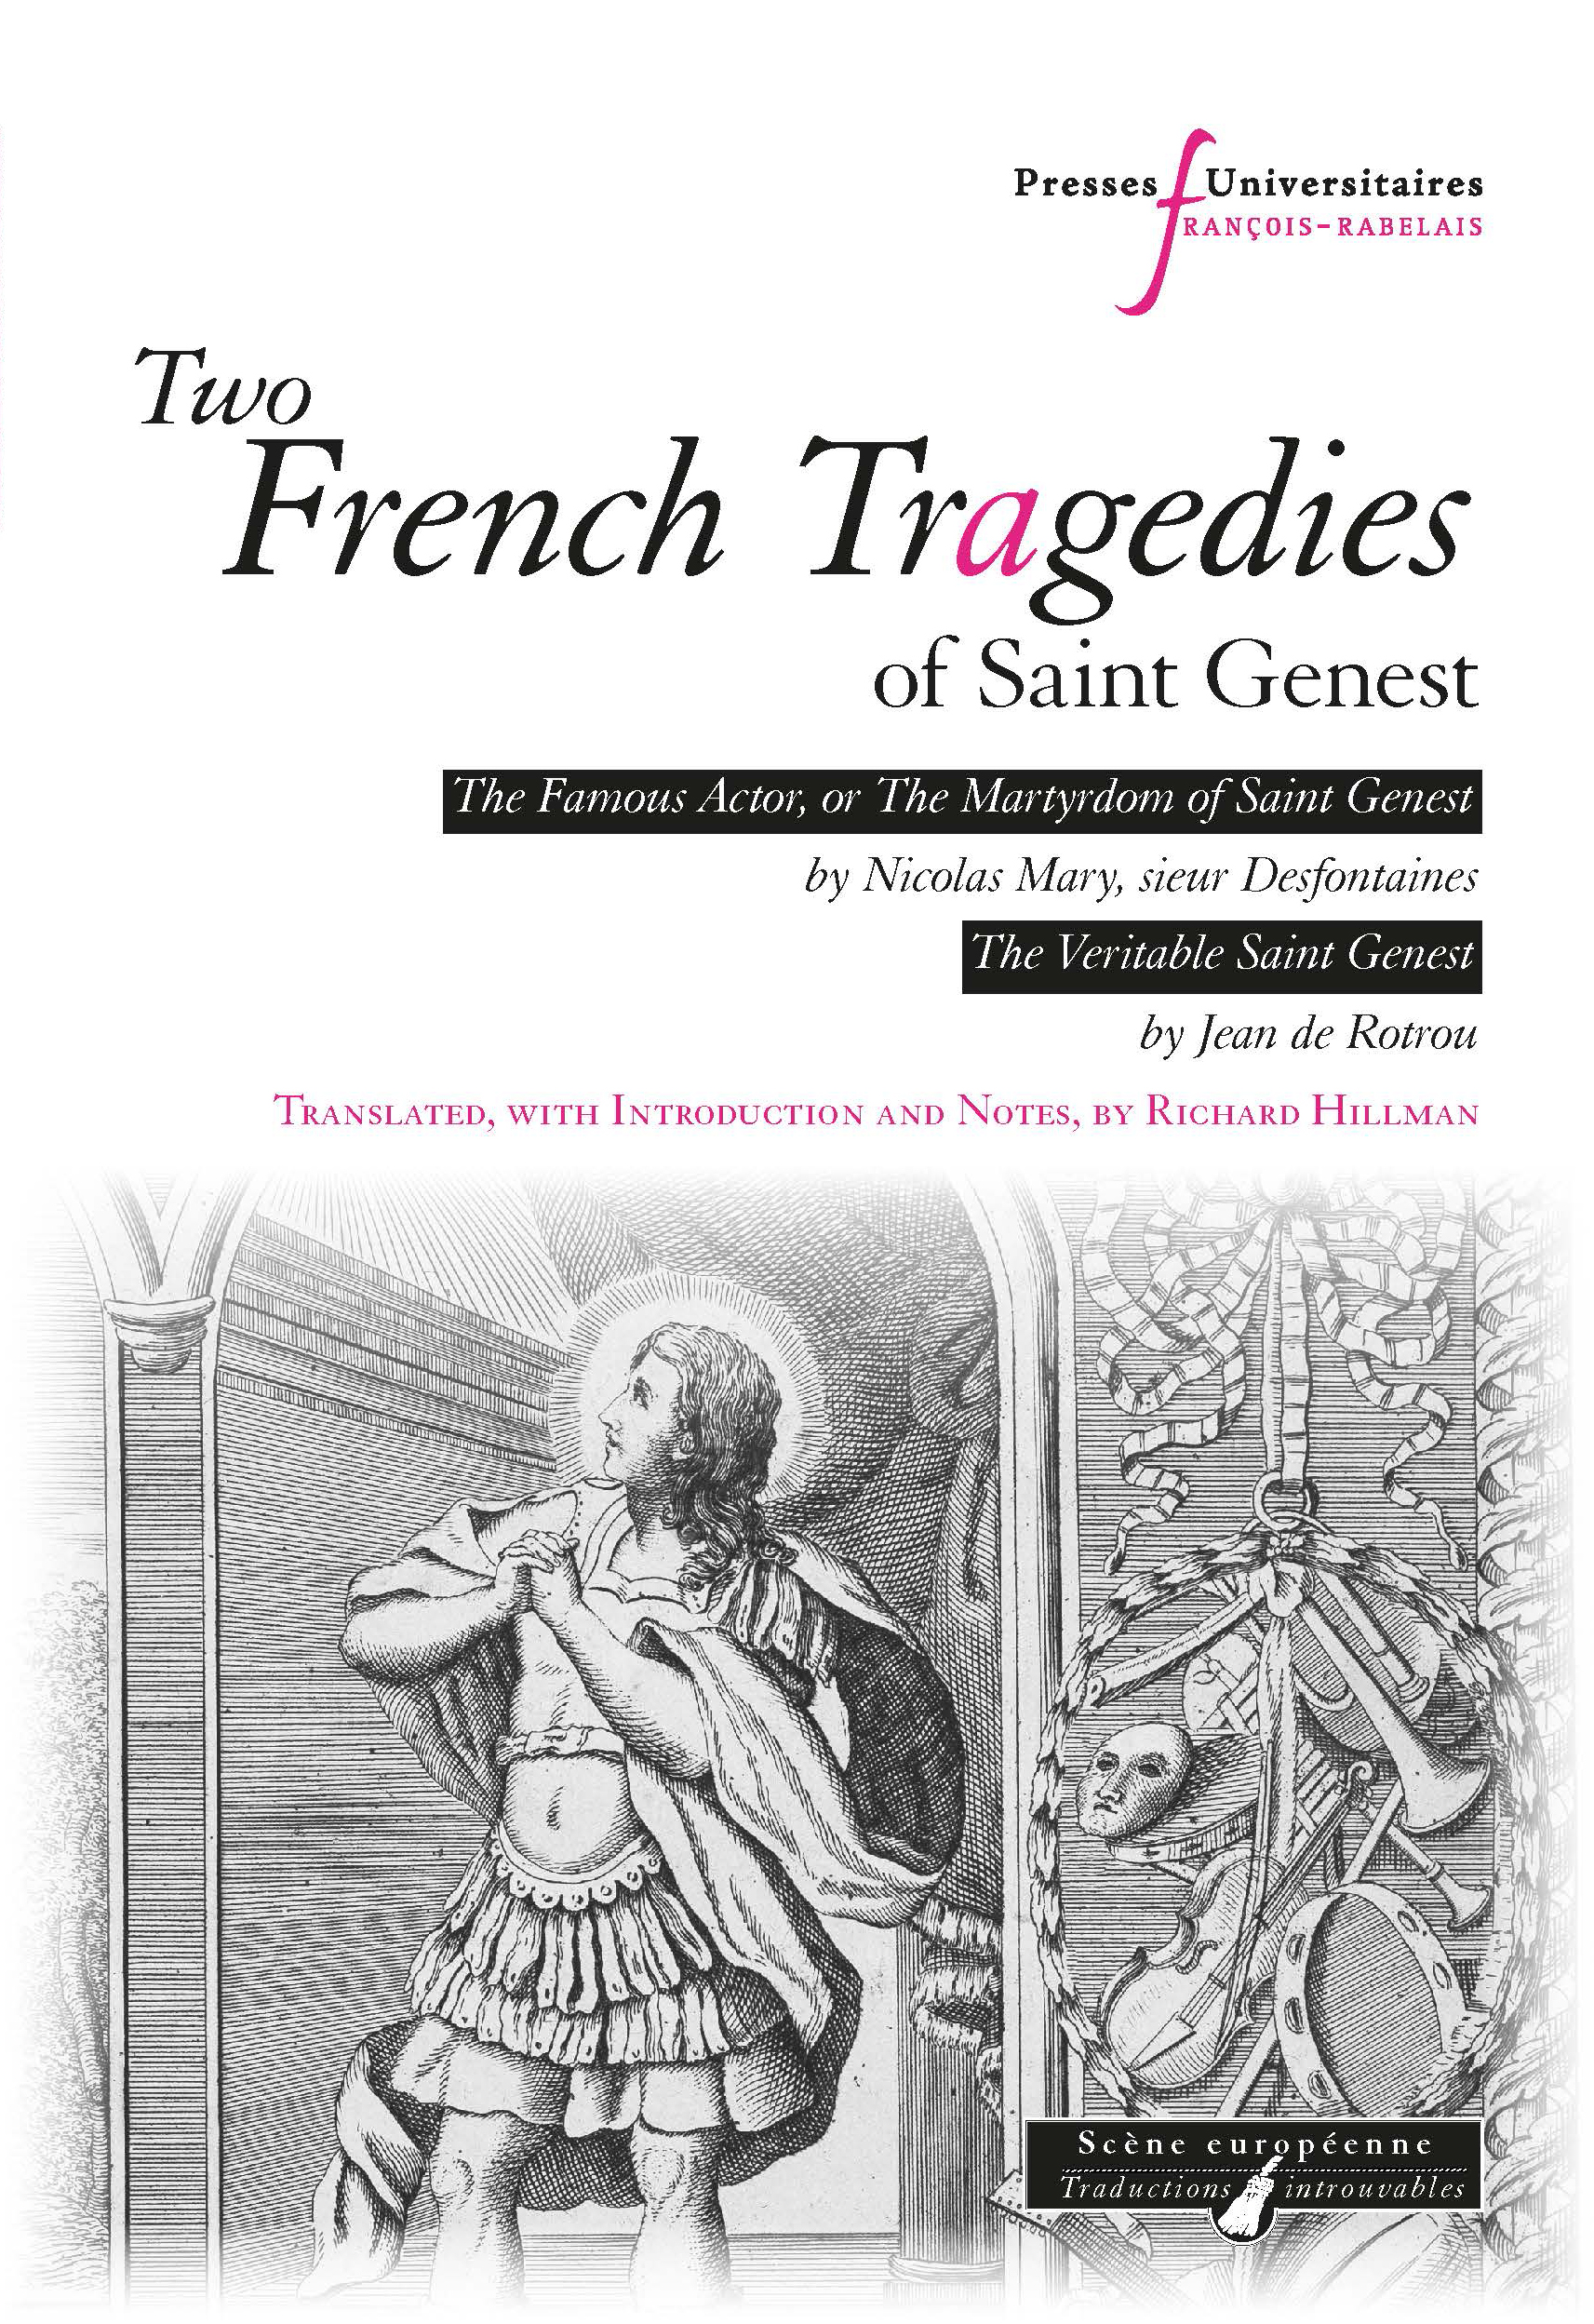 Two French Tragedies of Saint Genest